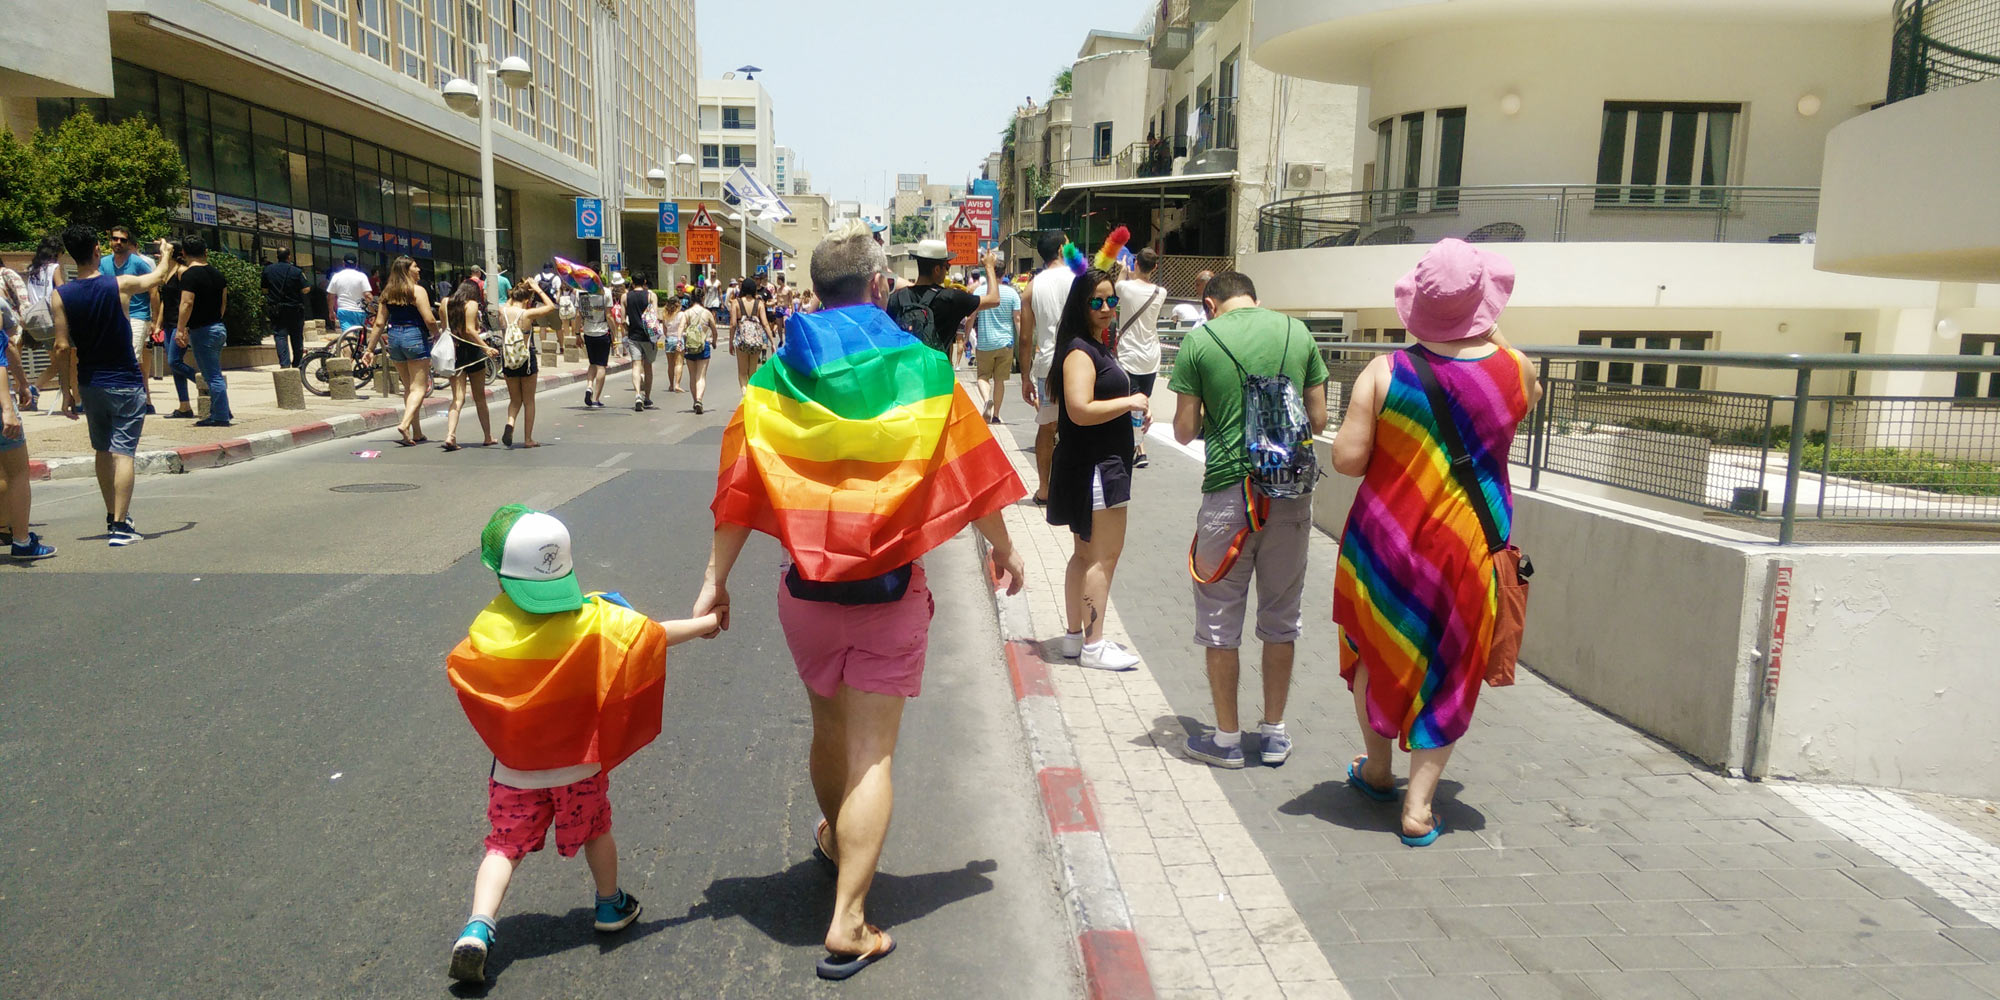 Tel Aviv Pride, father walks hand in hand with his child, both wearing rainbow flags, and a woman in a rainbow dress